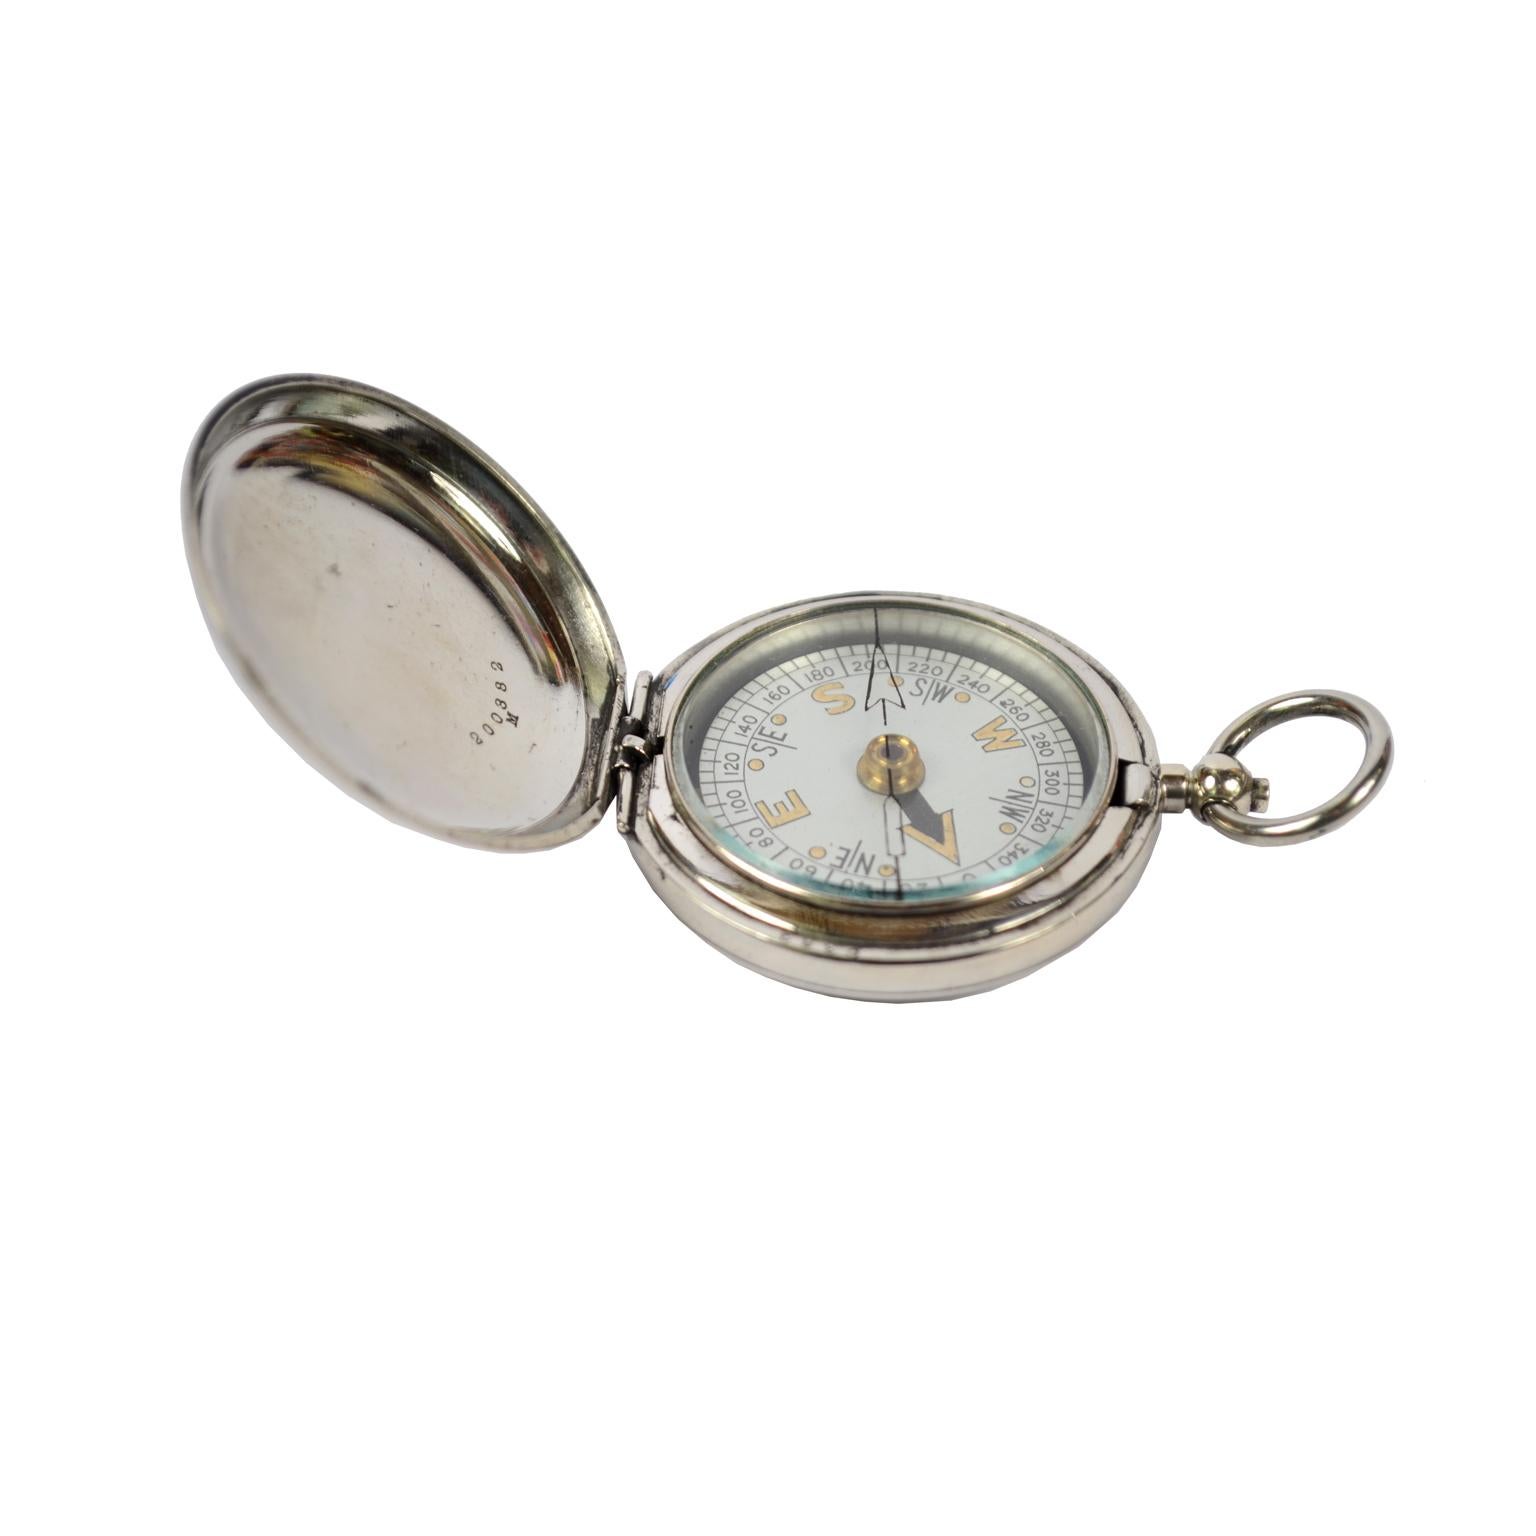 Early 20th Century Pocket Compass Used by RAF Officers, 1926